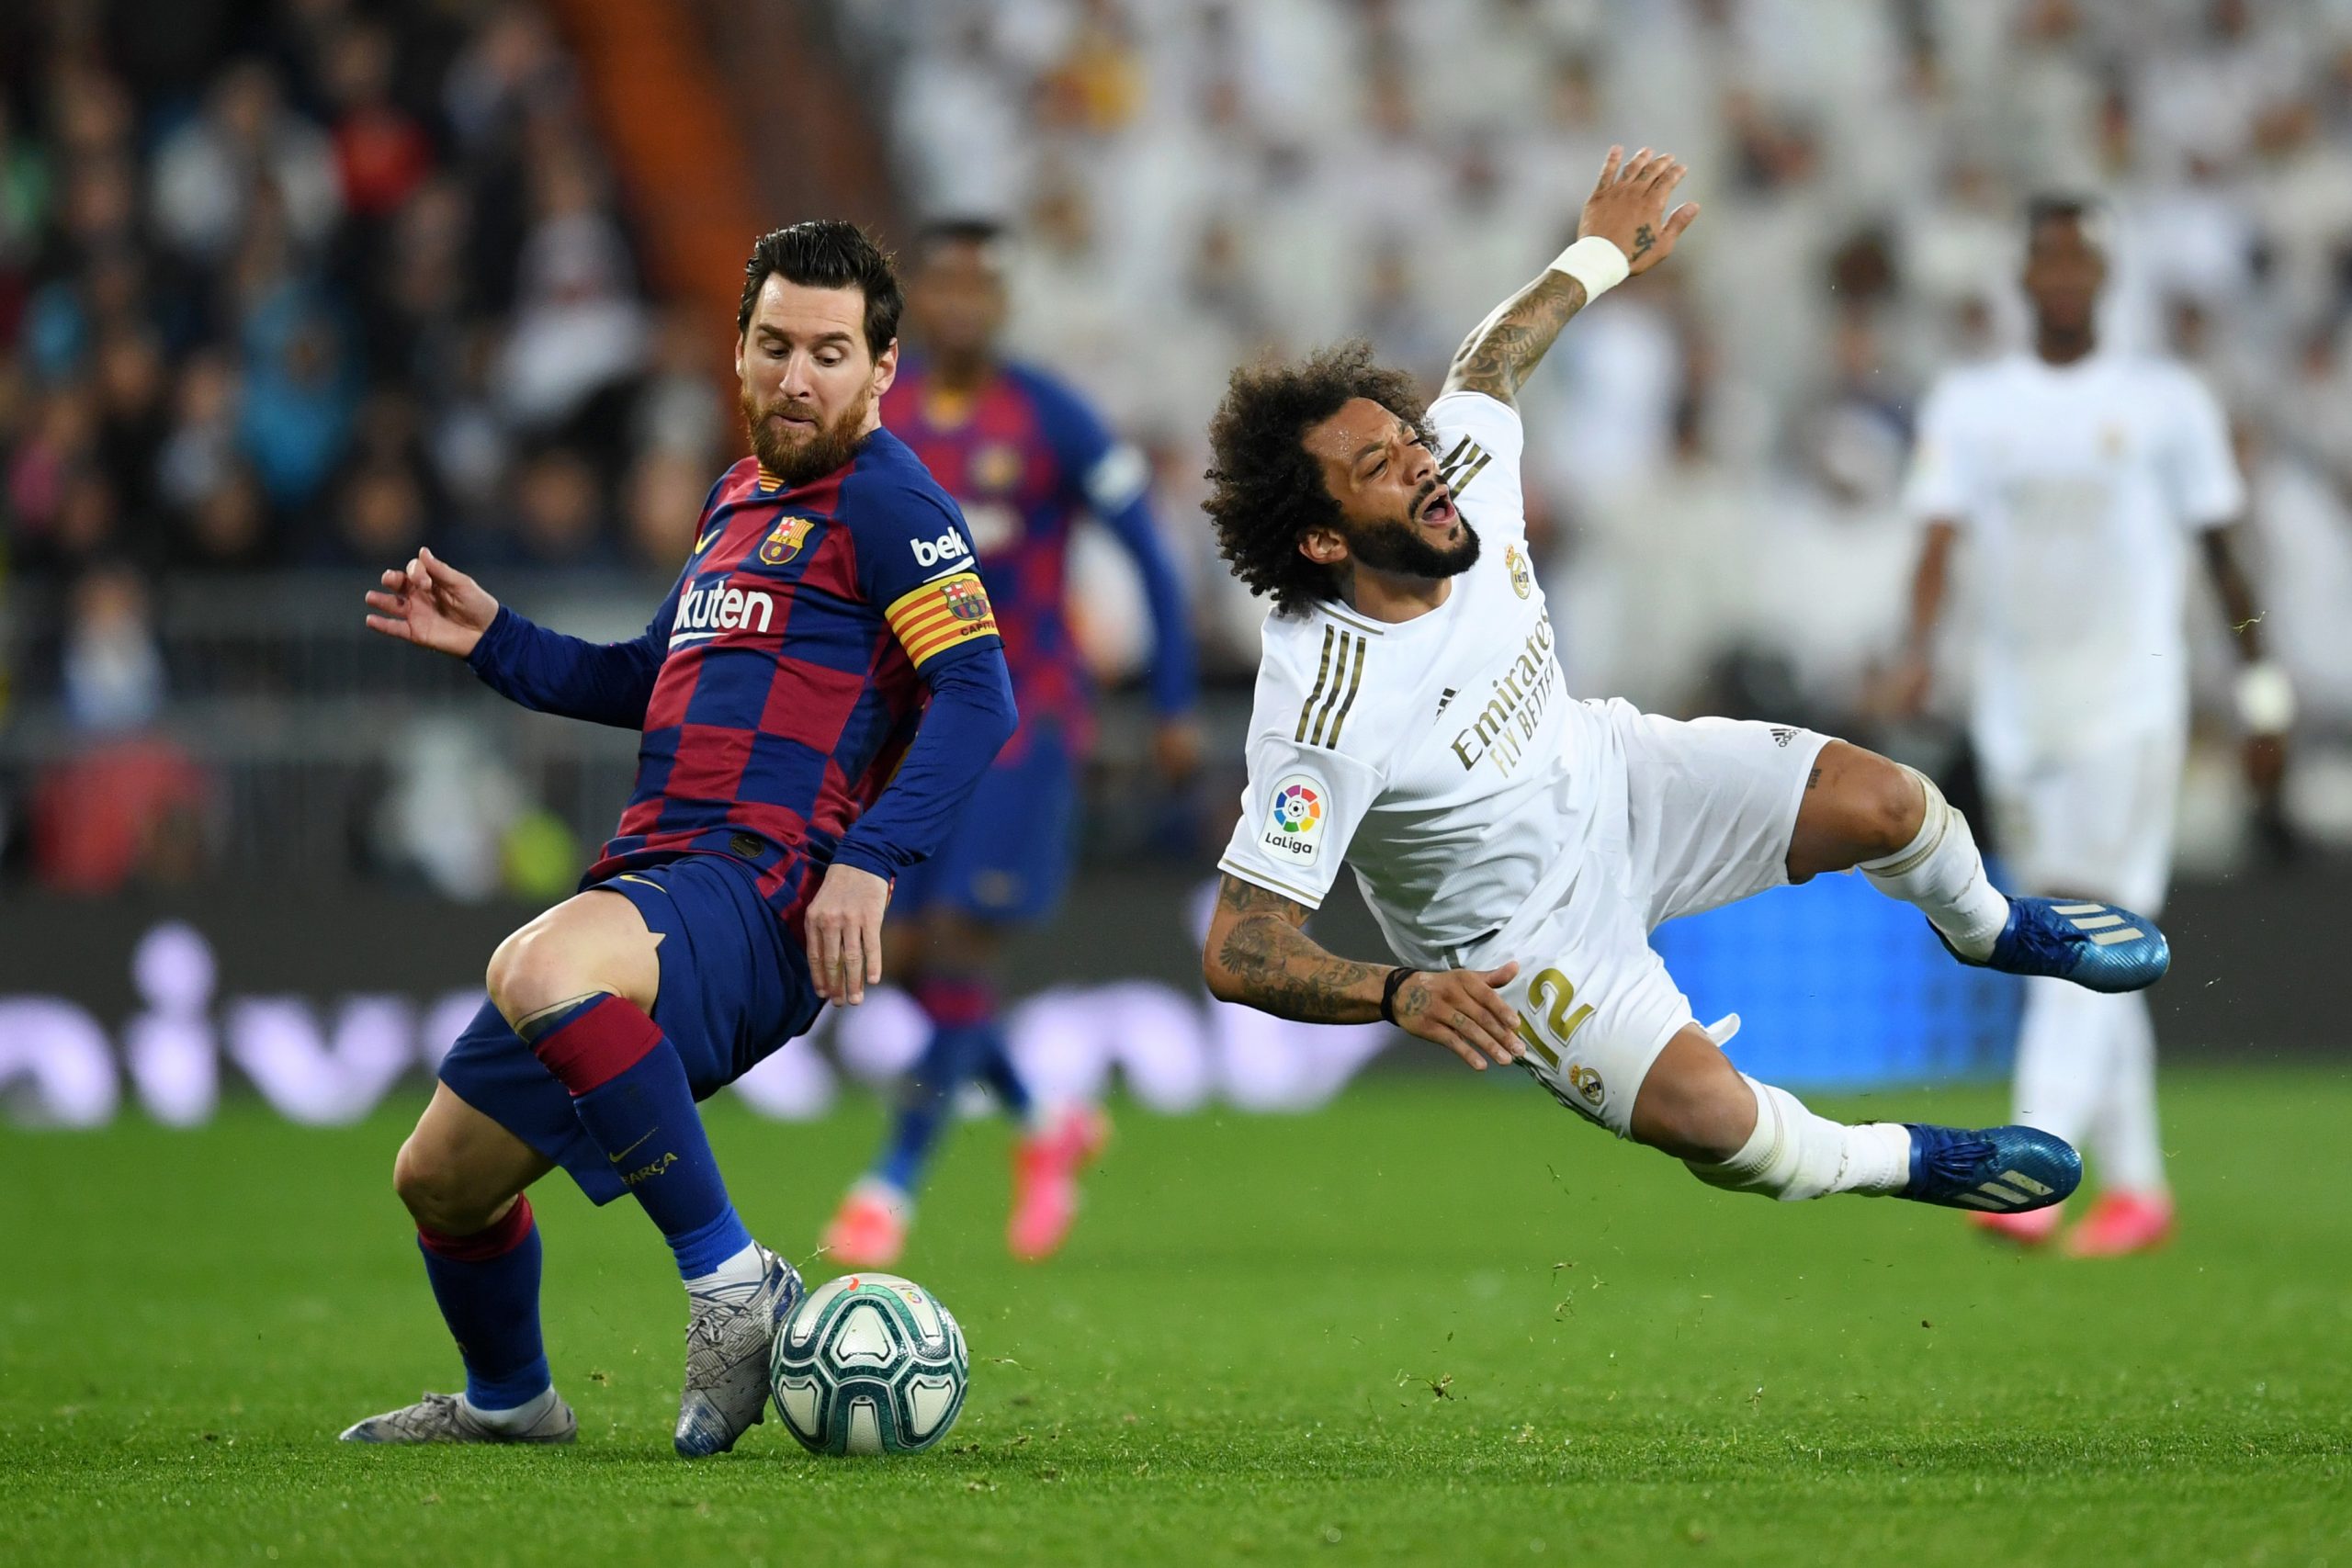 Lionel Messi and Marcelo going at each other during an El Clasico